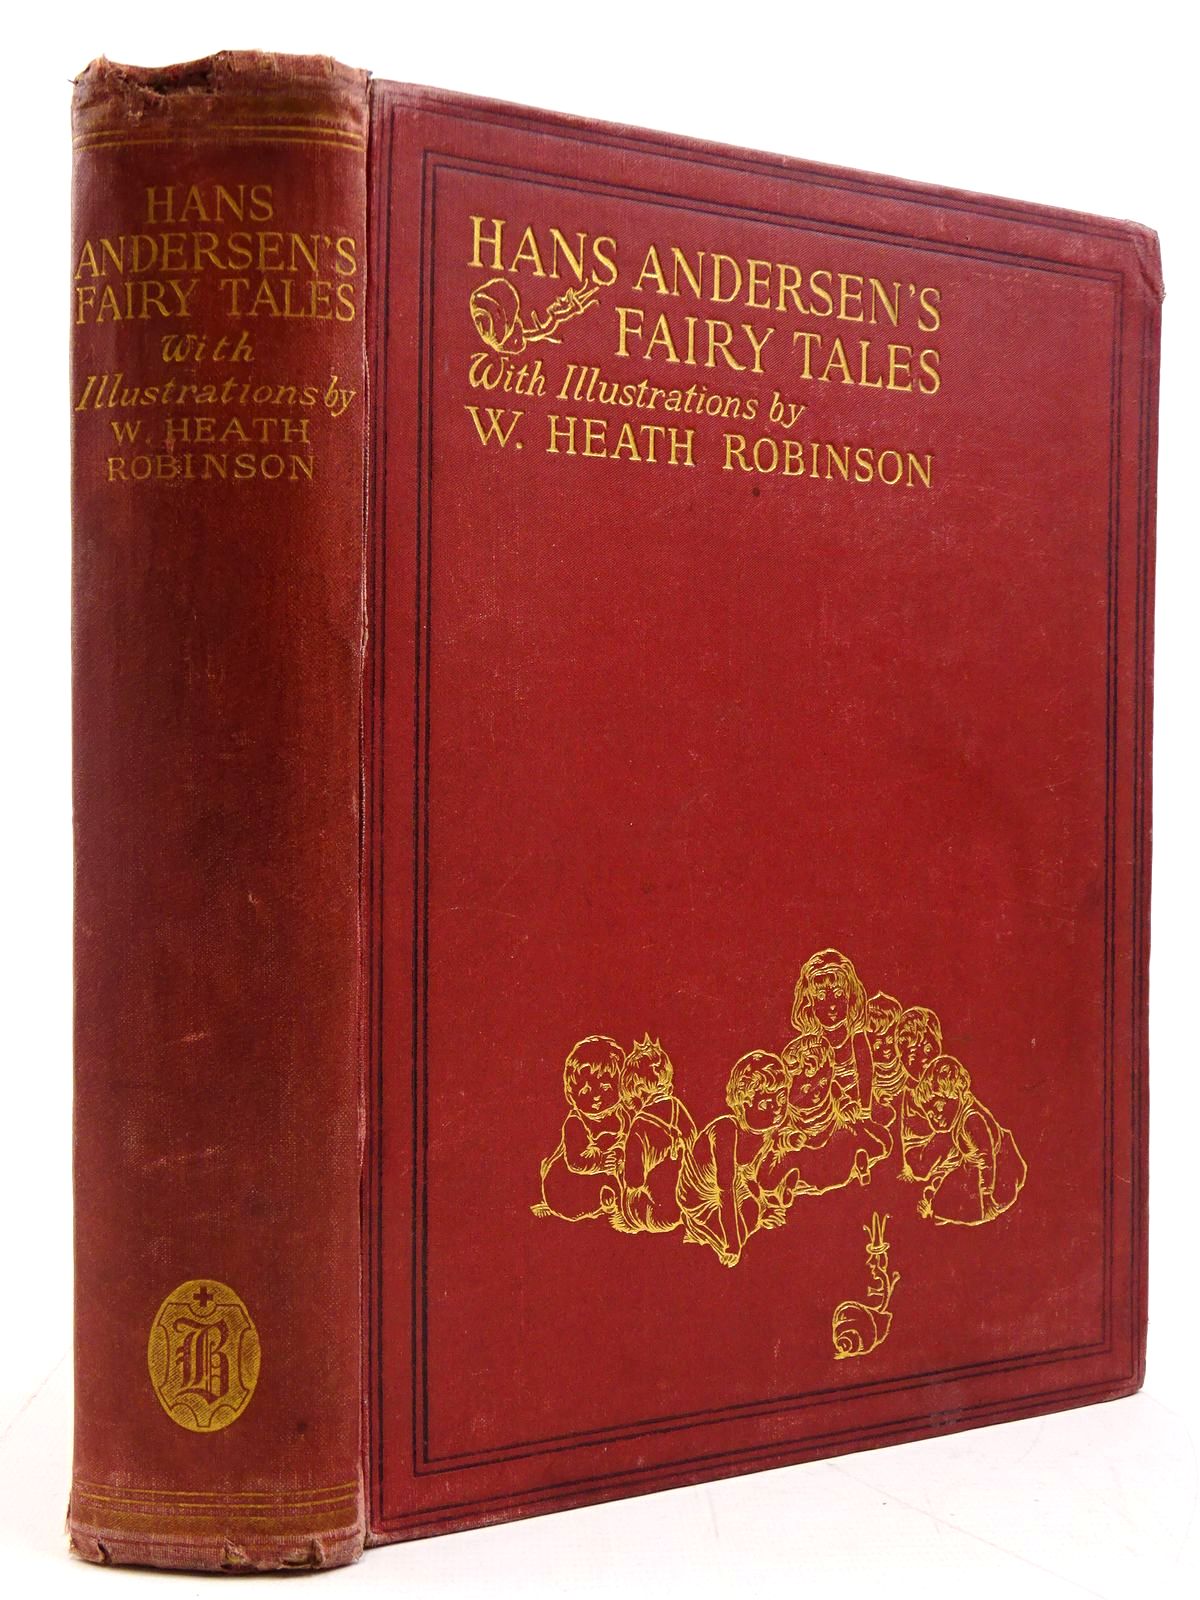 Photo of HANS ANDERSEN'S FAIRY TALES written by Andersen, Hans Christian illustrated by Robinson, W. Heath published by Hodder & Stoughton, Boots the Chemists (STOCK CODE: 2130872)  for sale by Stella & Rose's Books